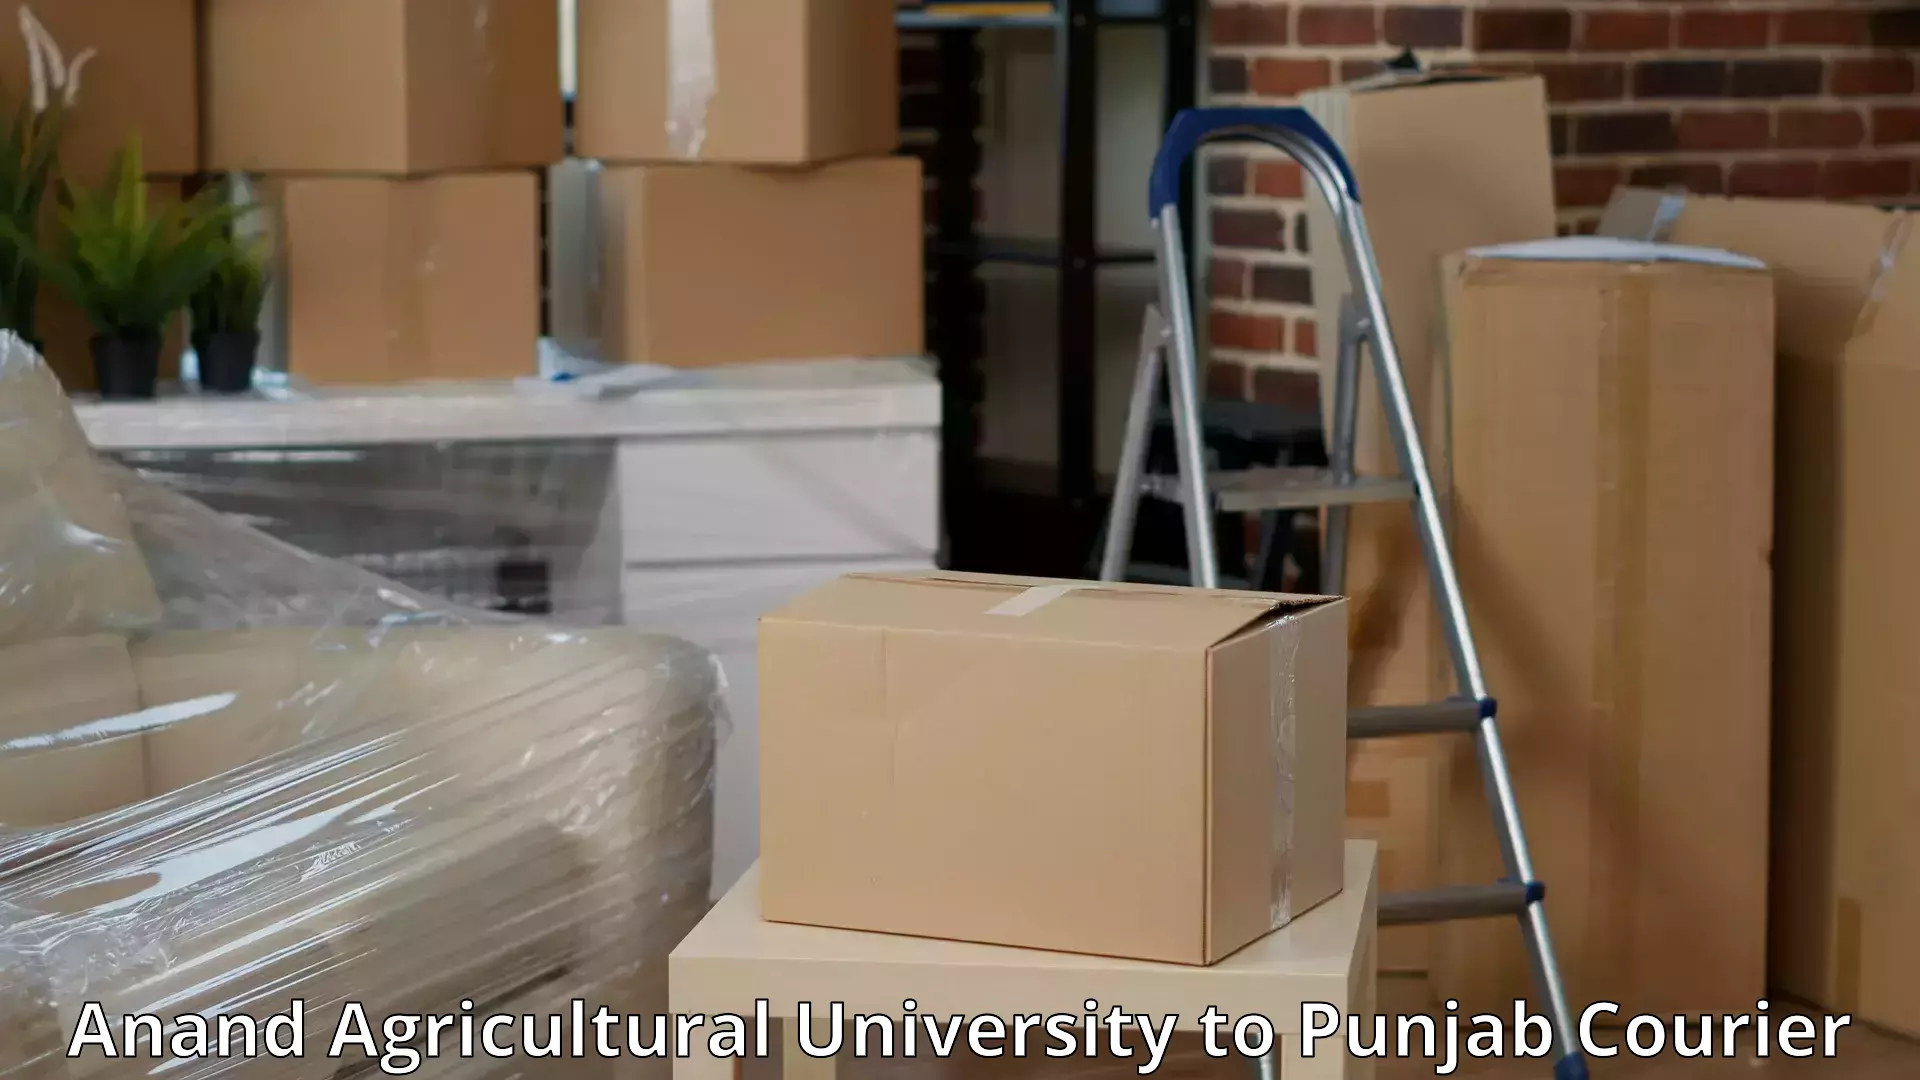 Full-service movers Anand Agricultural University to Goindwal Sahib